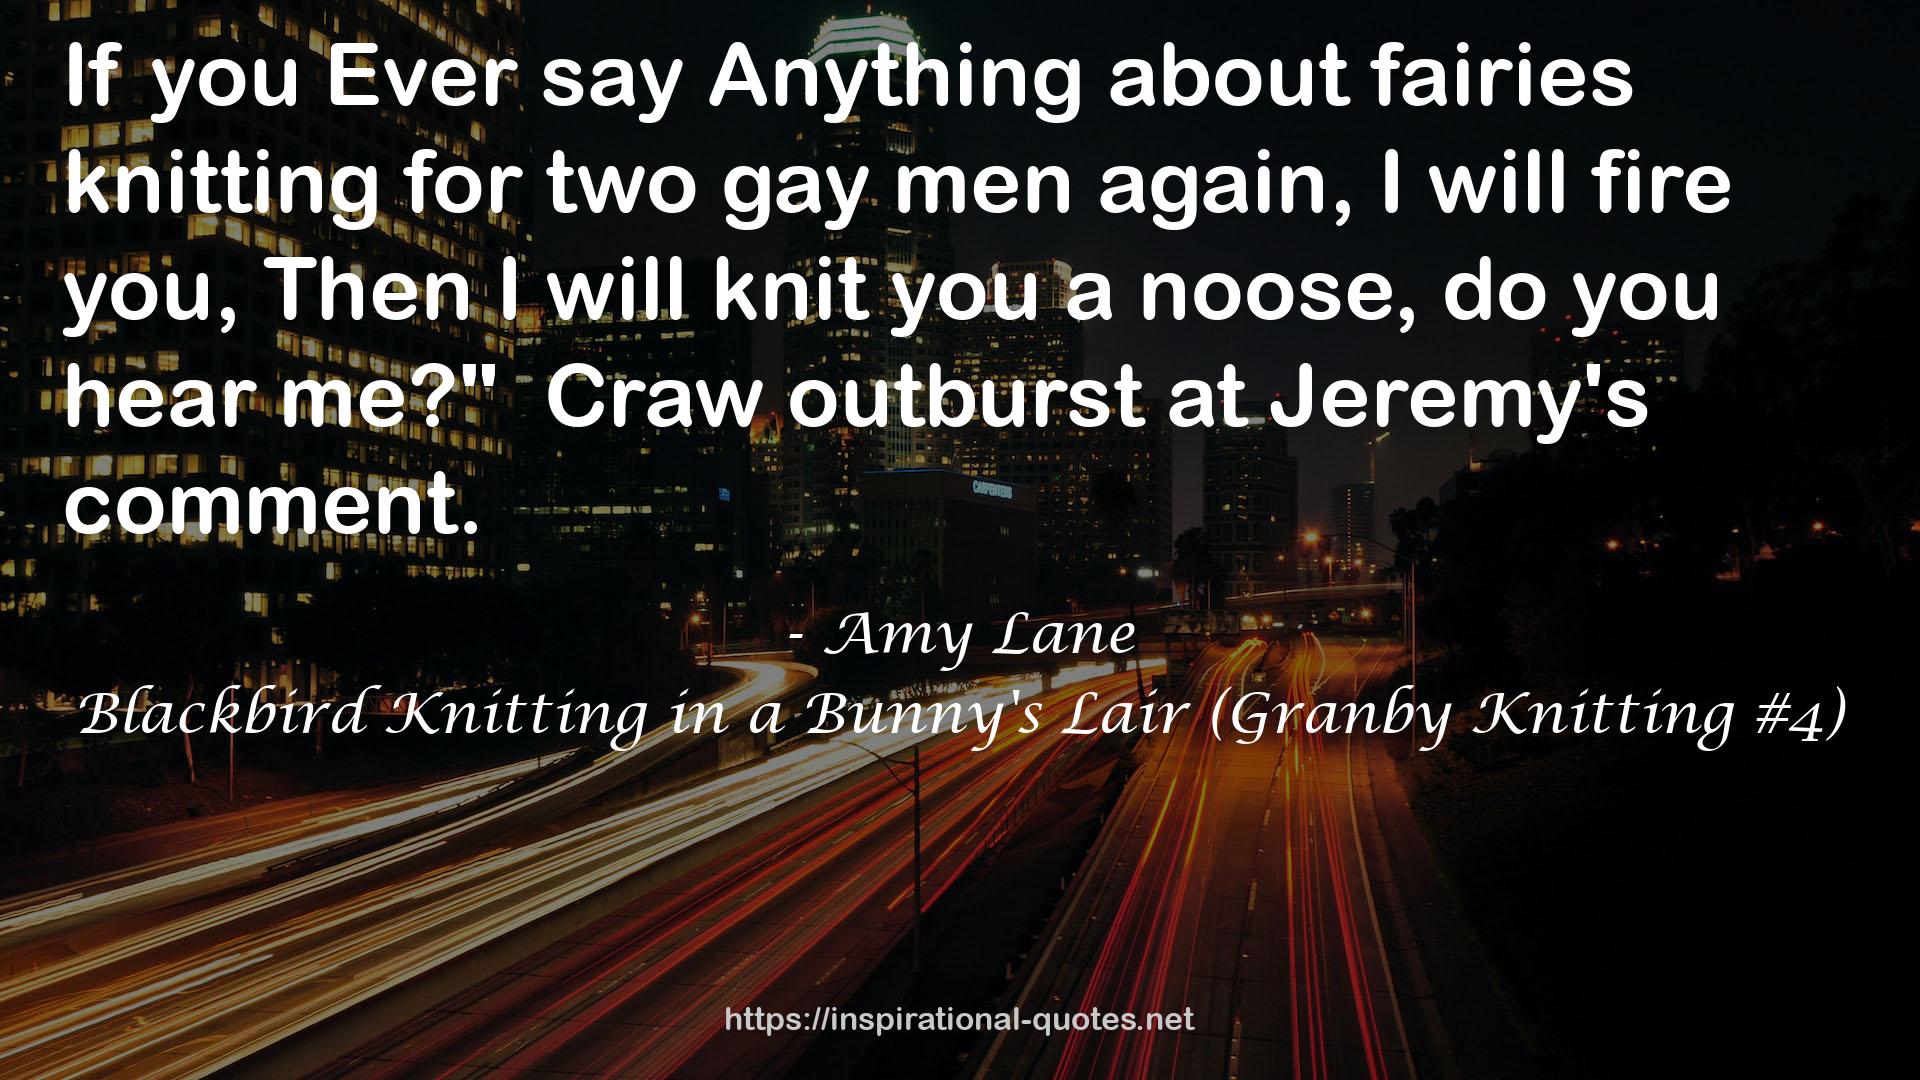 Blackbird Knitting in a Bunny's Lair (Granby Knitting #4) QUOTES